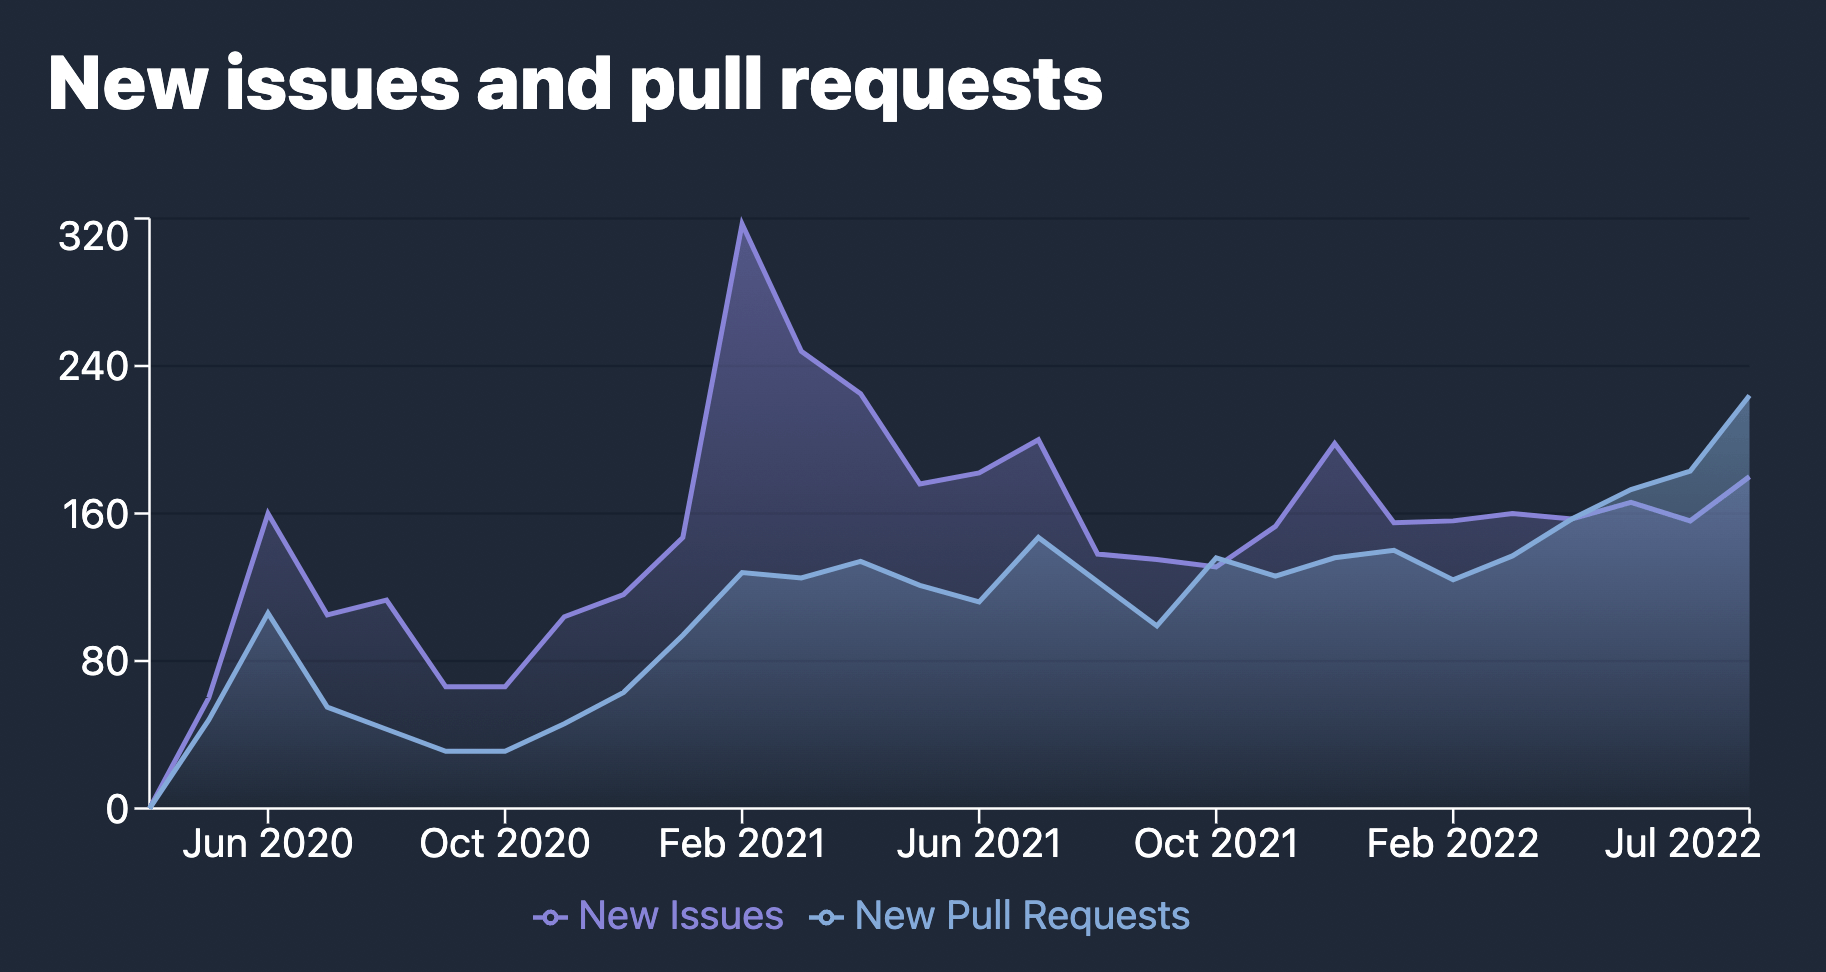 Graph of new issues and pull requests in Vite